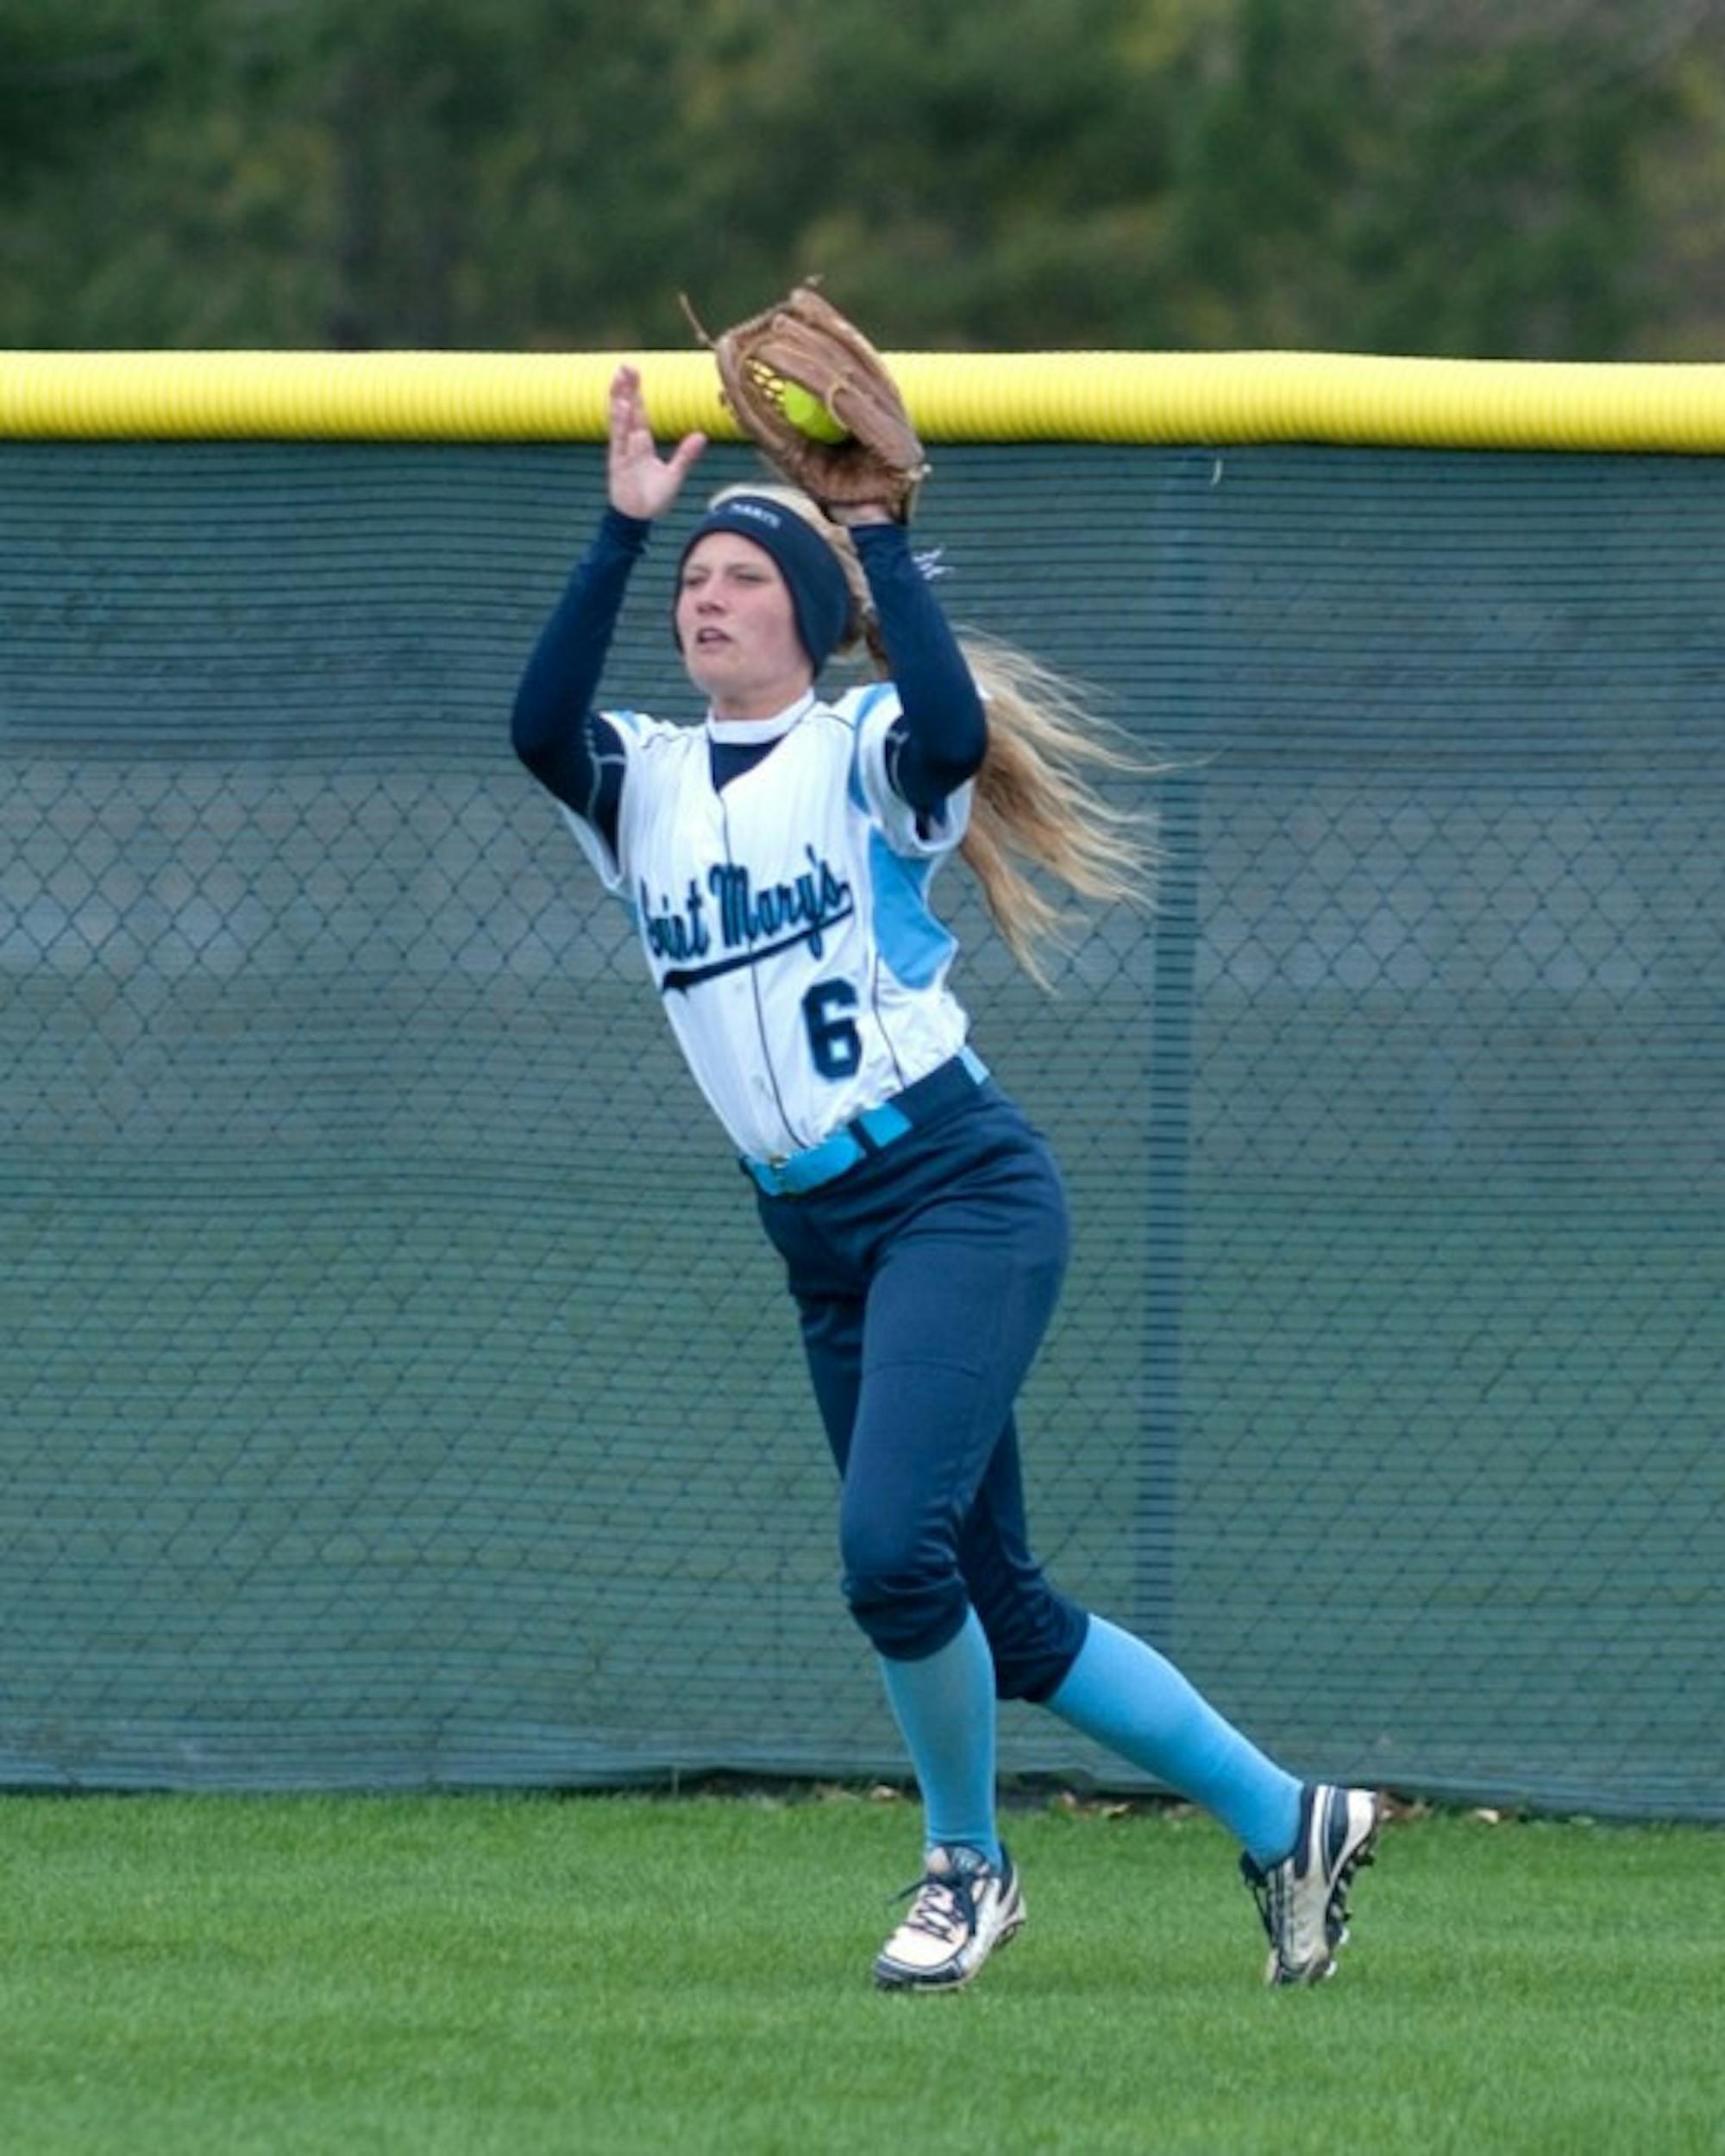 Freshman Cassie Young fields a fly ball during a 9-6 win against Kalamazoo on April 21 at Saint Mary's Softball Field.